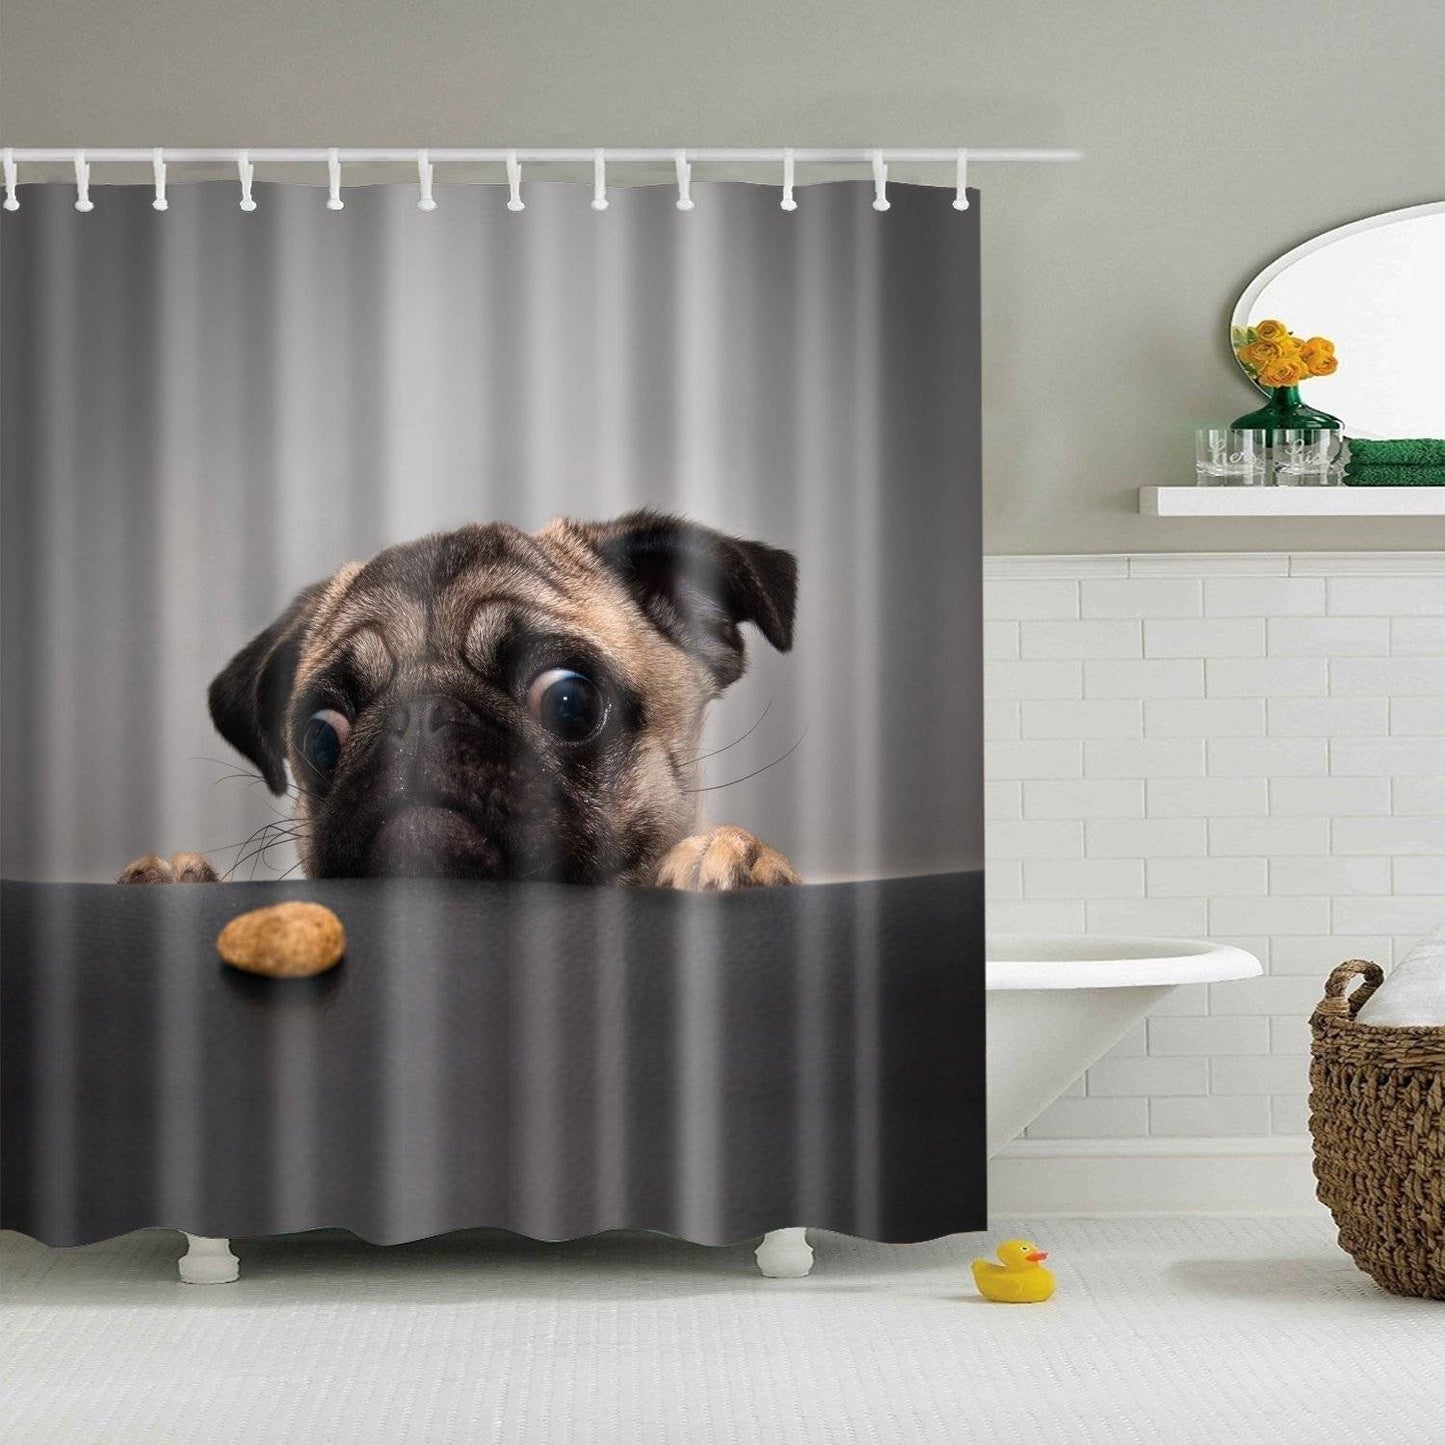 Staring at Cookie Grey Tan Puppy Cute Pug Shower Curtain